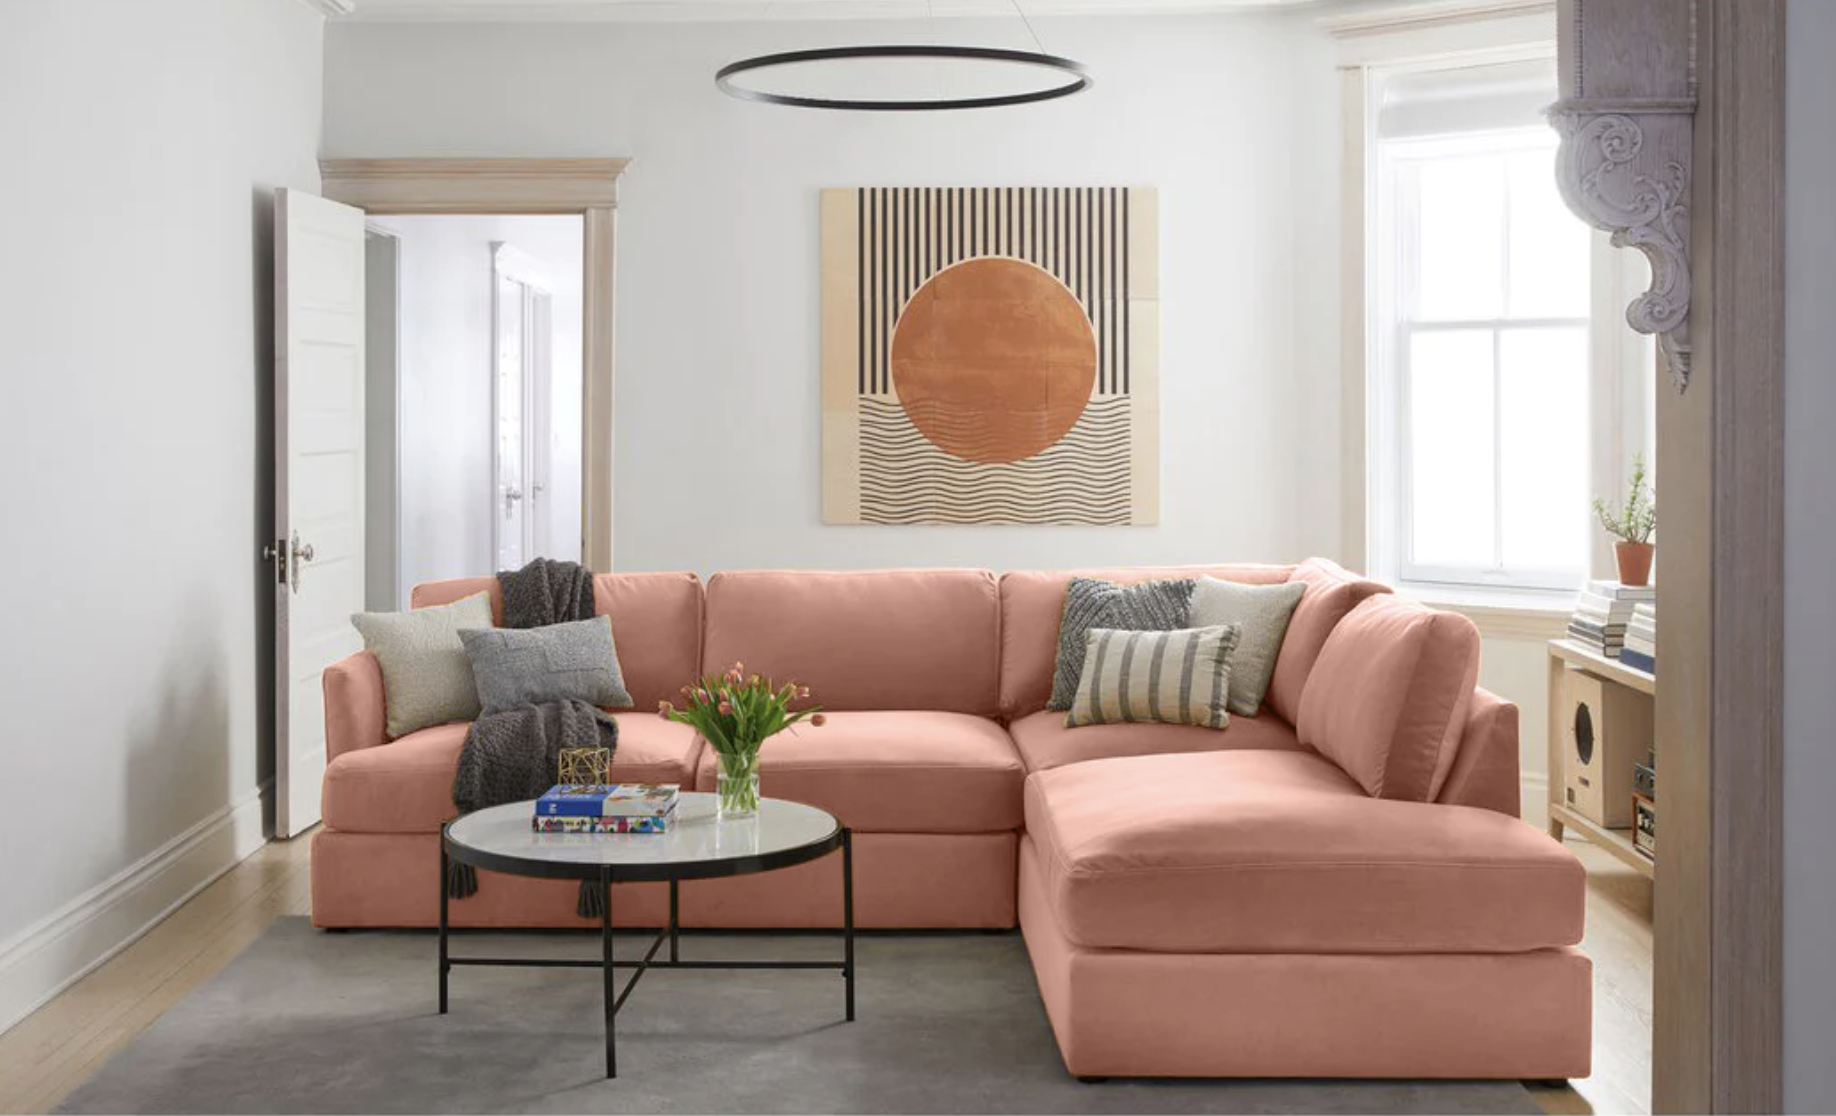 A pink velvet sectional is shown in a living room